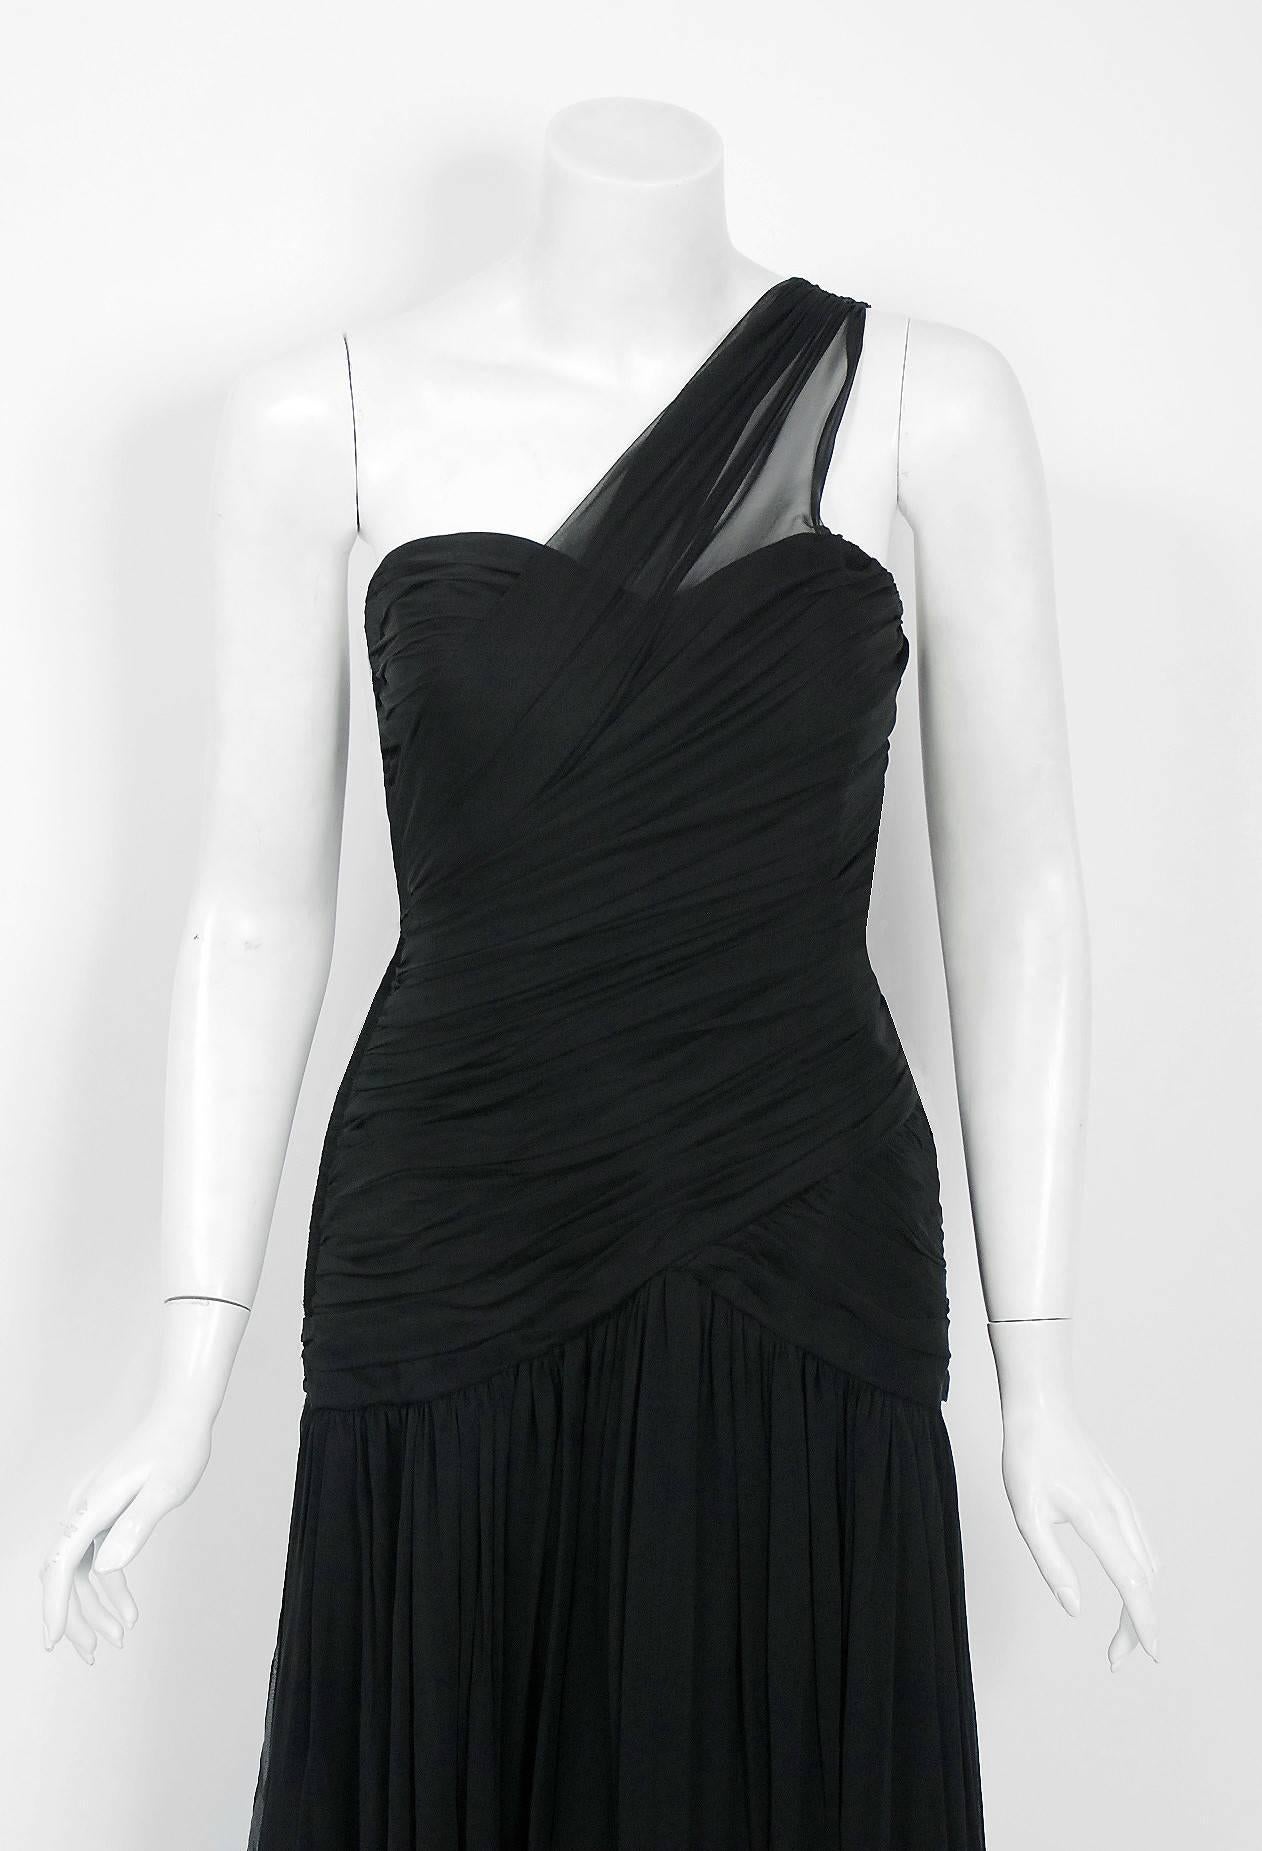 This breathtaking Adele Simpson designer gown, dating back to mid 1970's, is one of the most flattering black dresses I have seen in a while. Fashioned from light-weight silk chiffon, the fabric feels like heaven against the  skin. The bodice is a